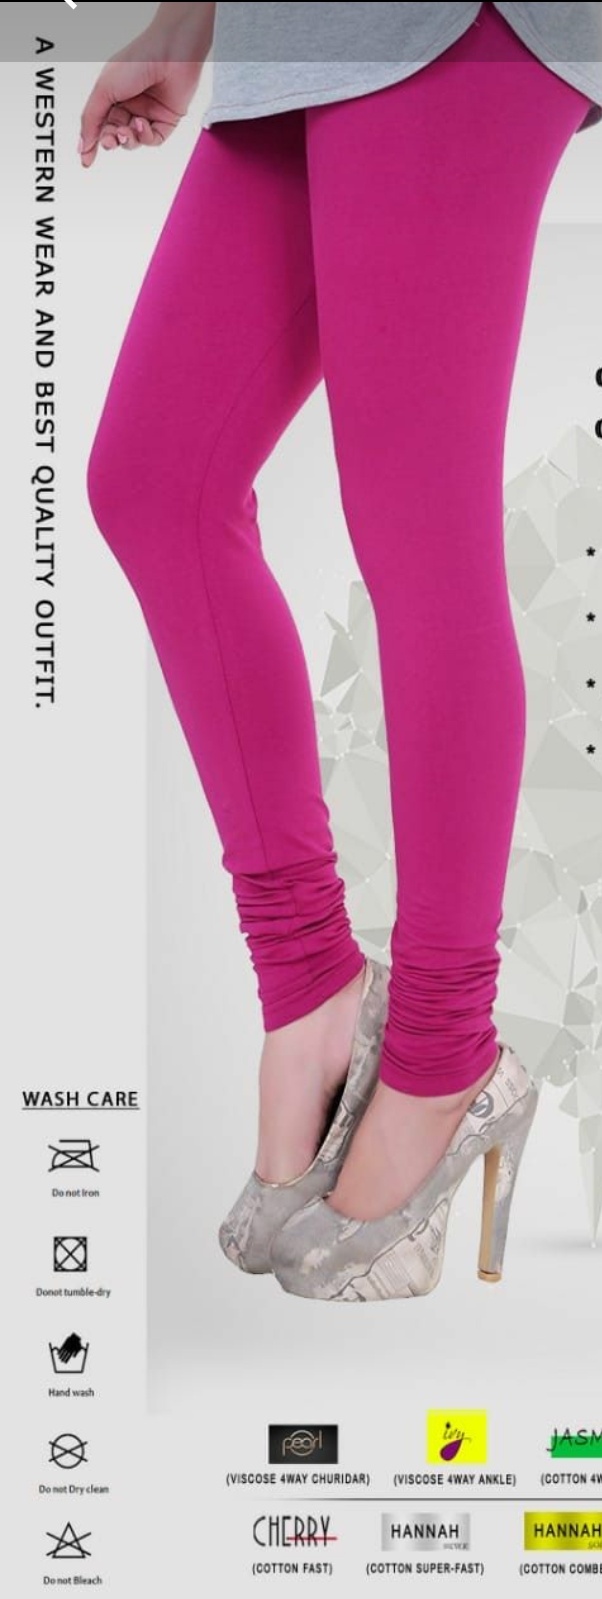 Buy INFUSE Fitted Full Length Cotton Lycra Women's Leggings | Shoppers Stop